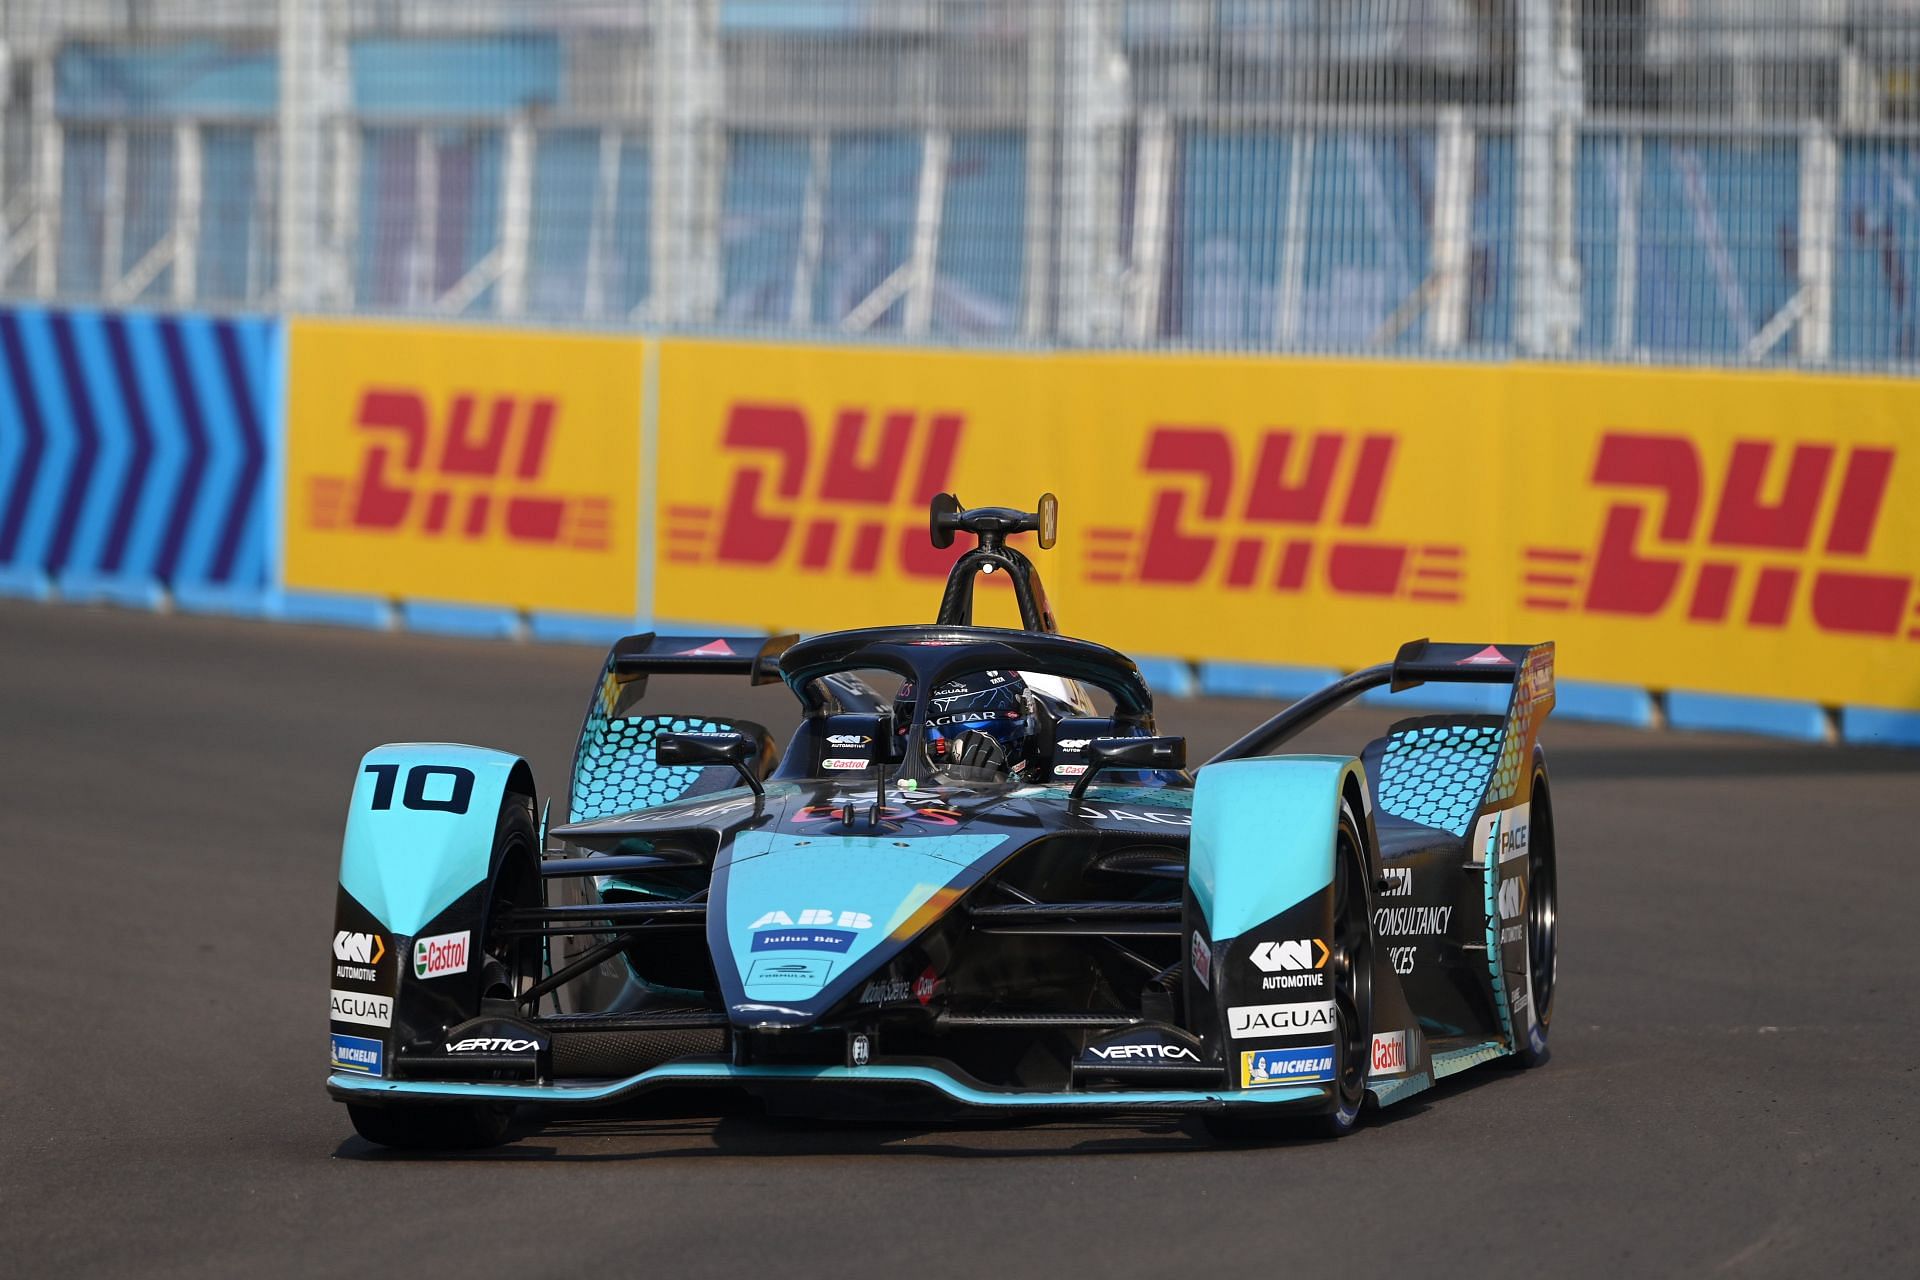 A shot from the 2022 Jakarta ePrix (Image via Getty)